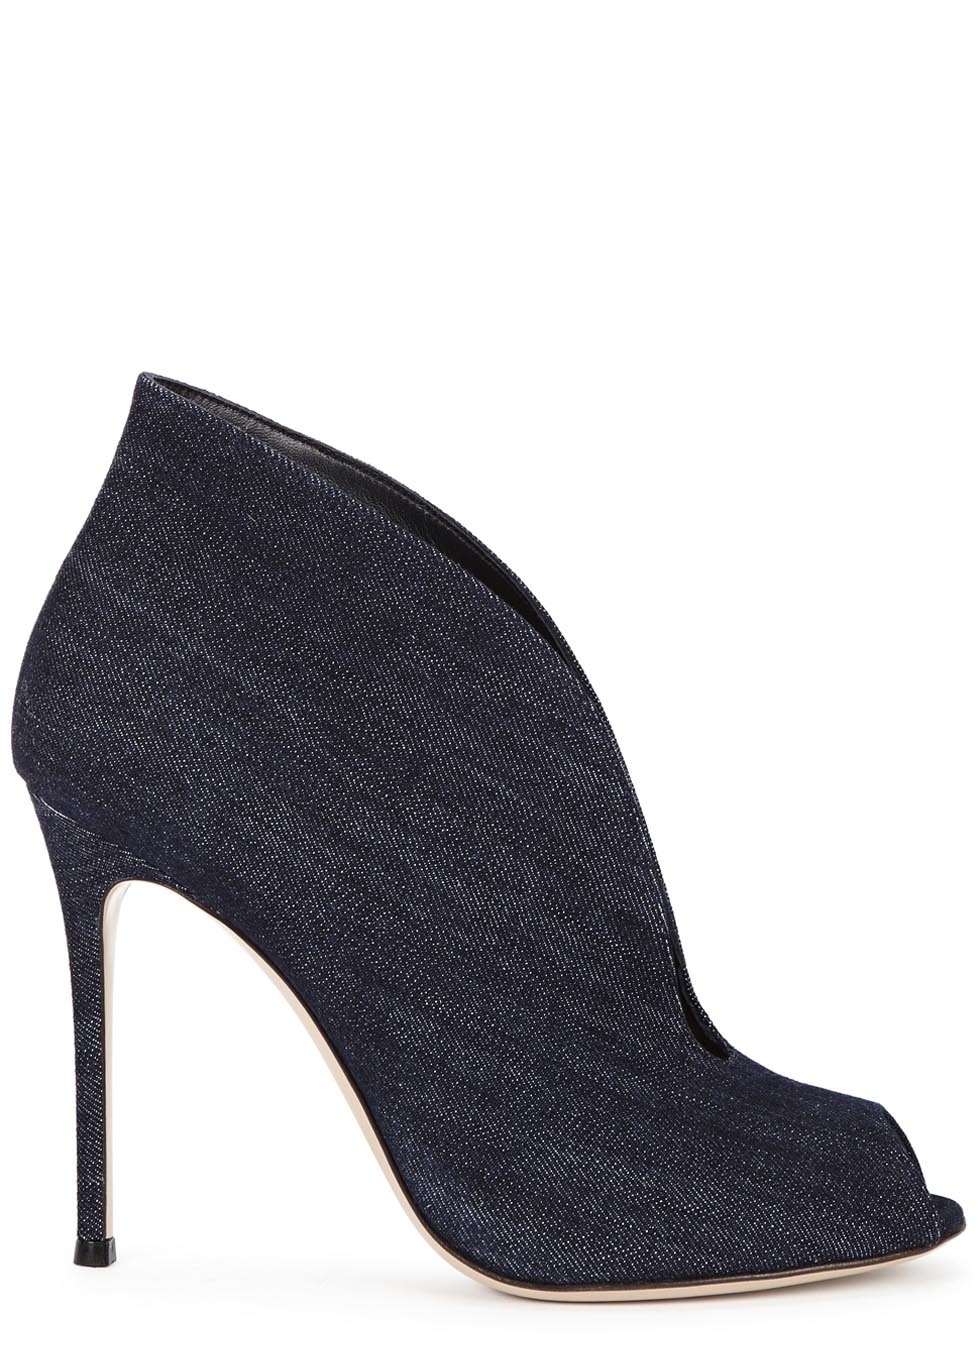 Navy cut-out denim ankle boots